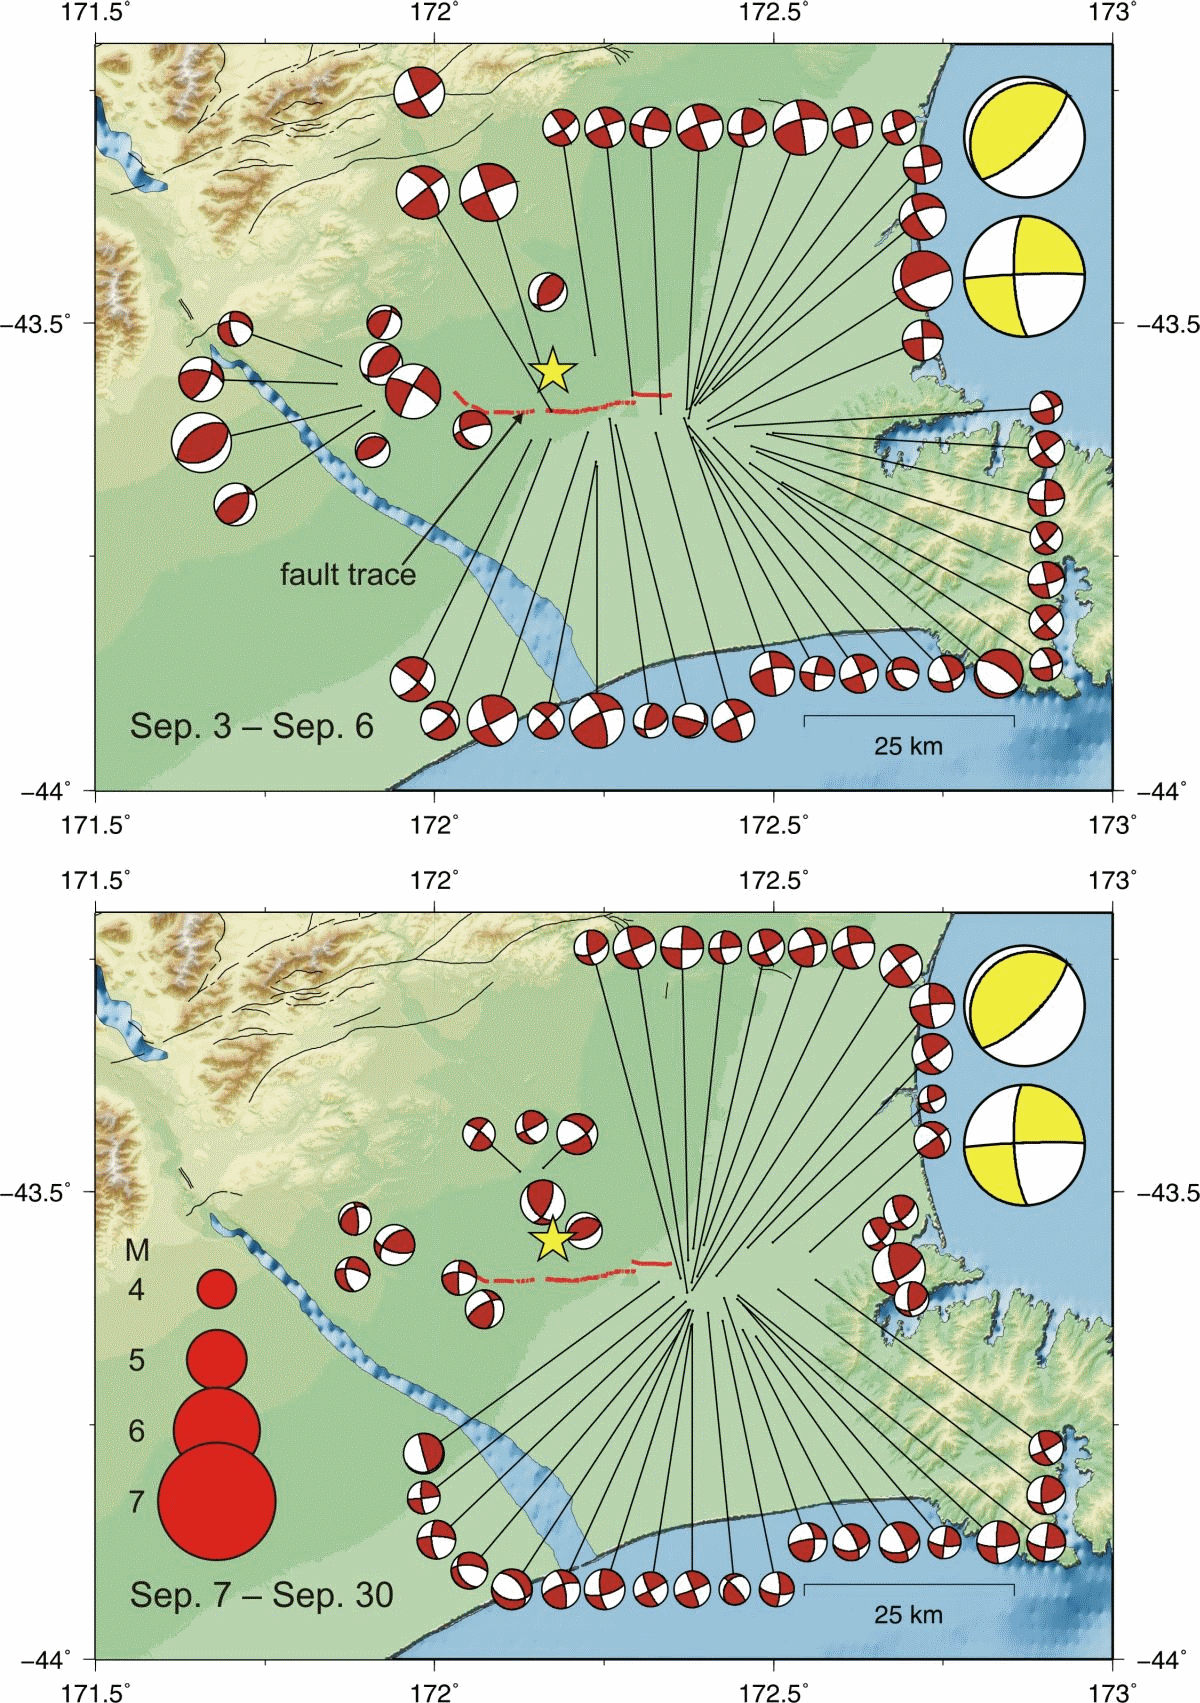 Figure 1: Focal mechanisms for the Darfield earthquake and 92 of its aftershocks. The top map is for the period 3-6 September UTC (Universal Time); the bottom map is for 7-30 September UTC.